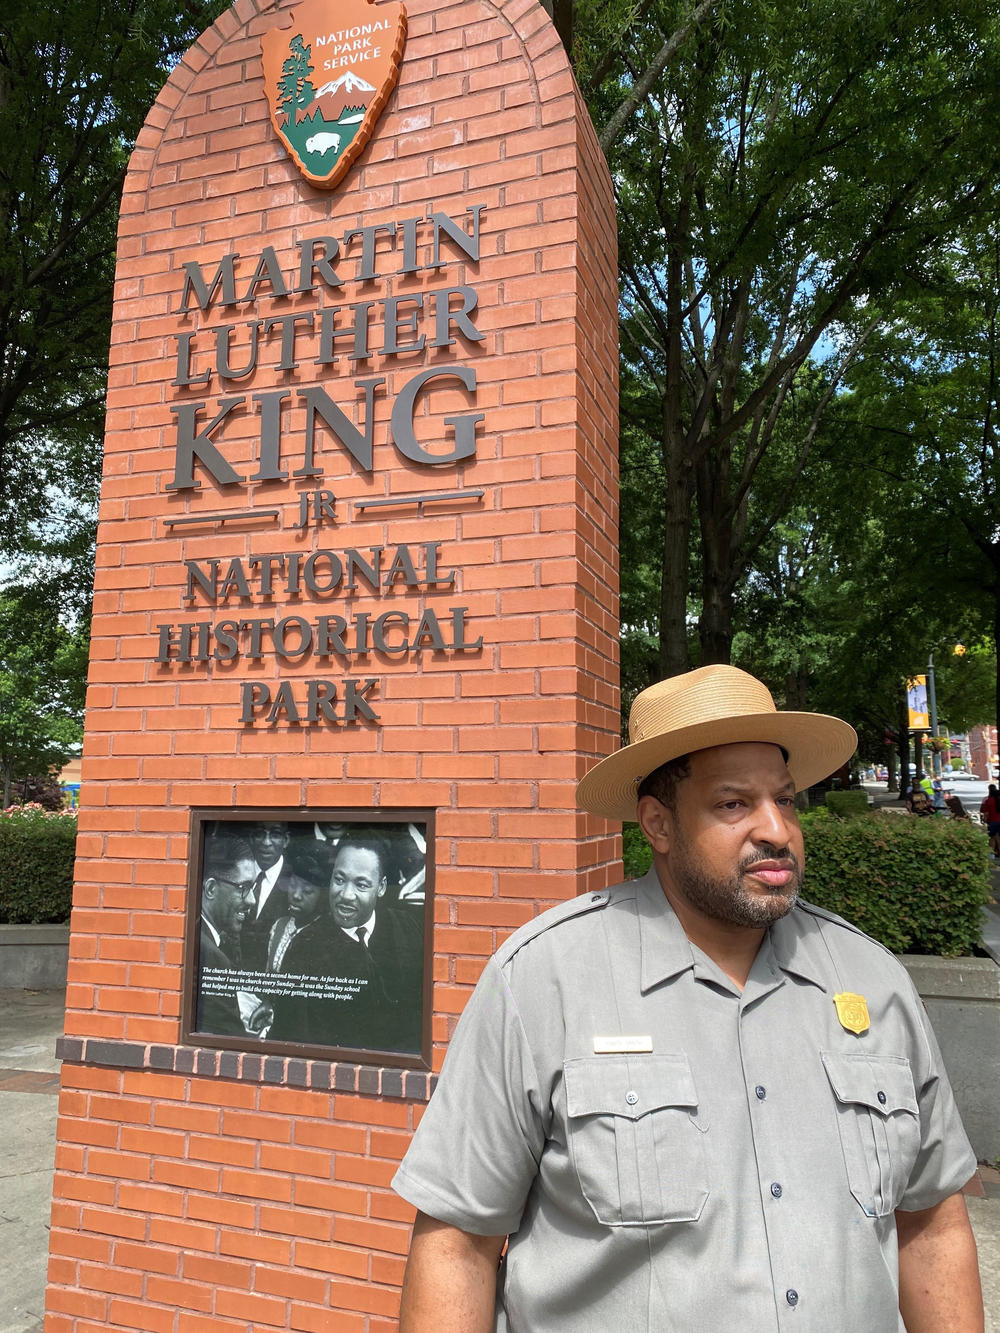 Marty Smith, interpretive ranger at the King National Historical Park, says people flock to the park when momentous news affects Black America.